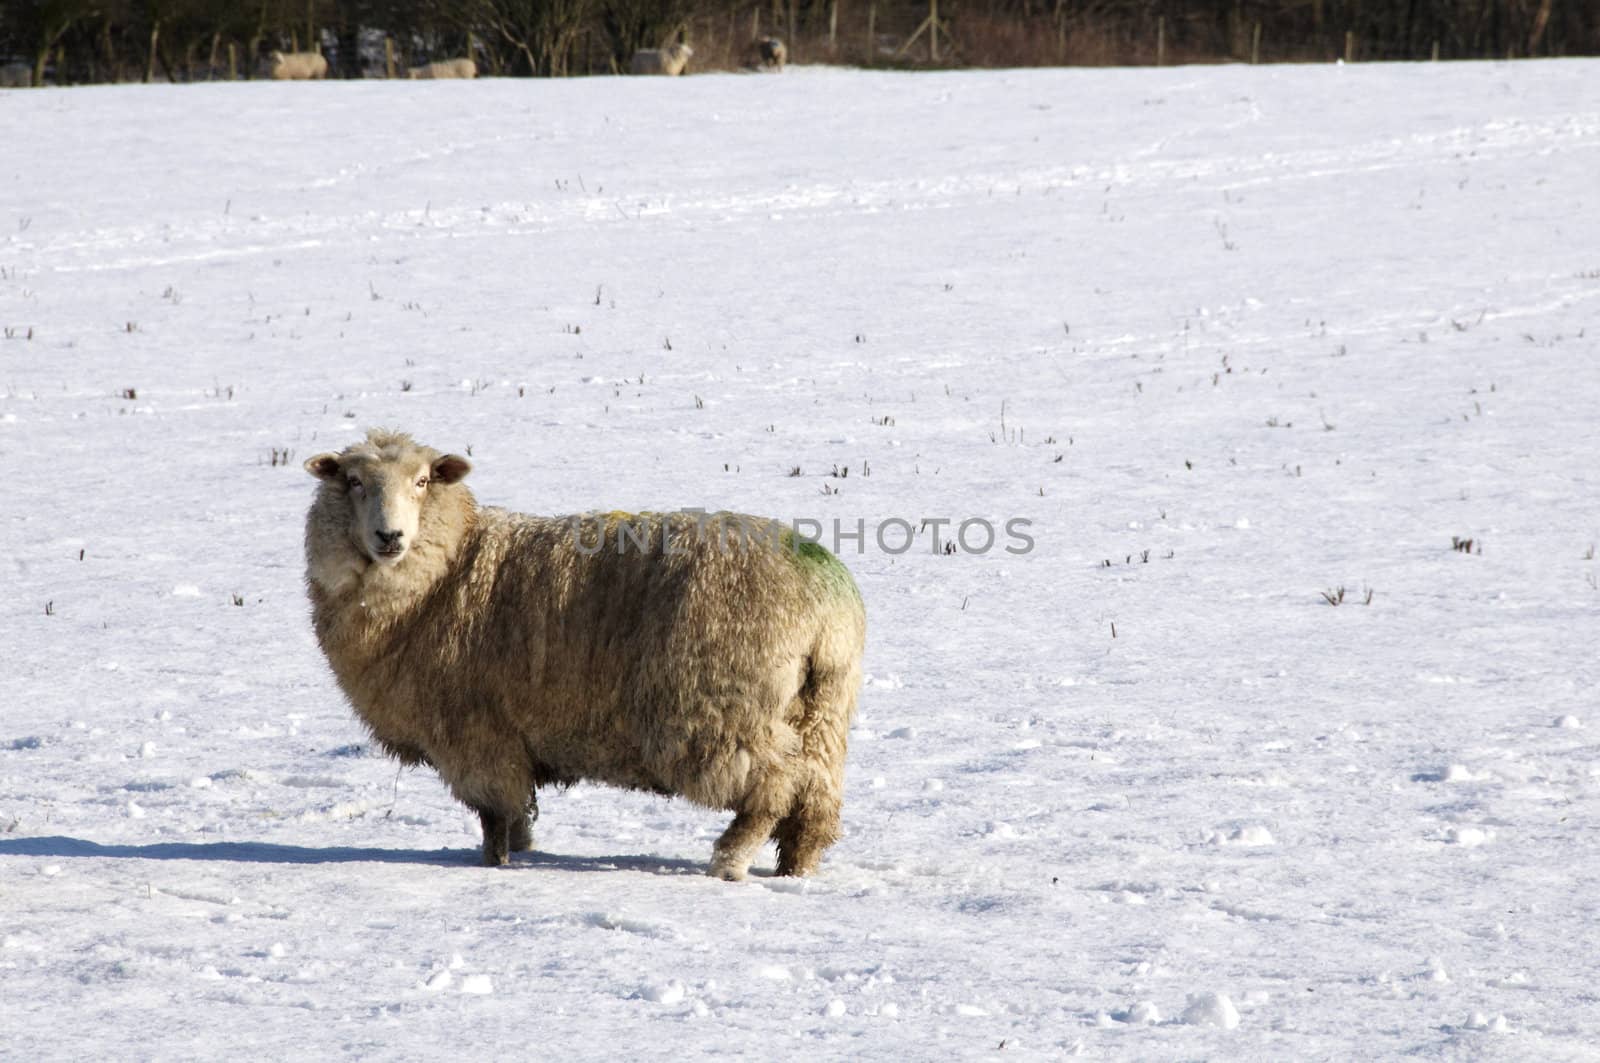 A sheep in field of snow in winter